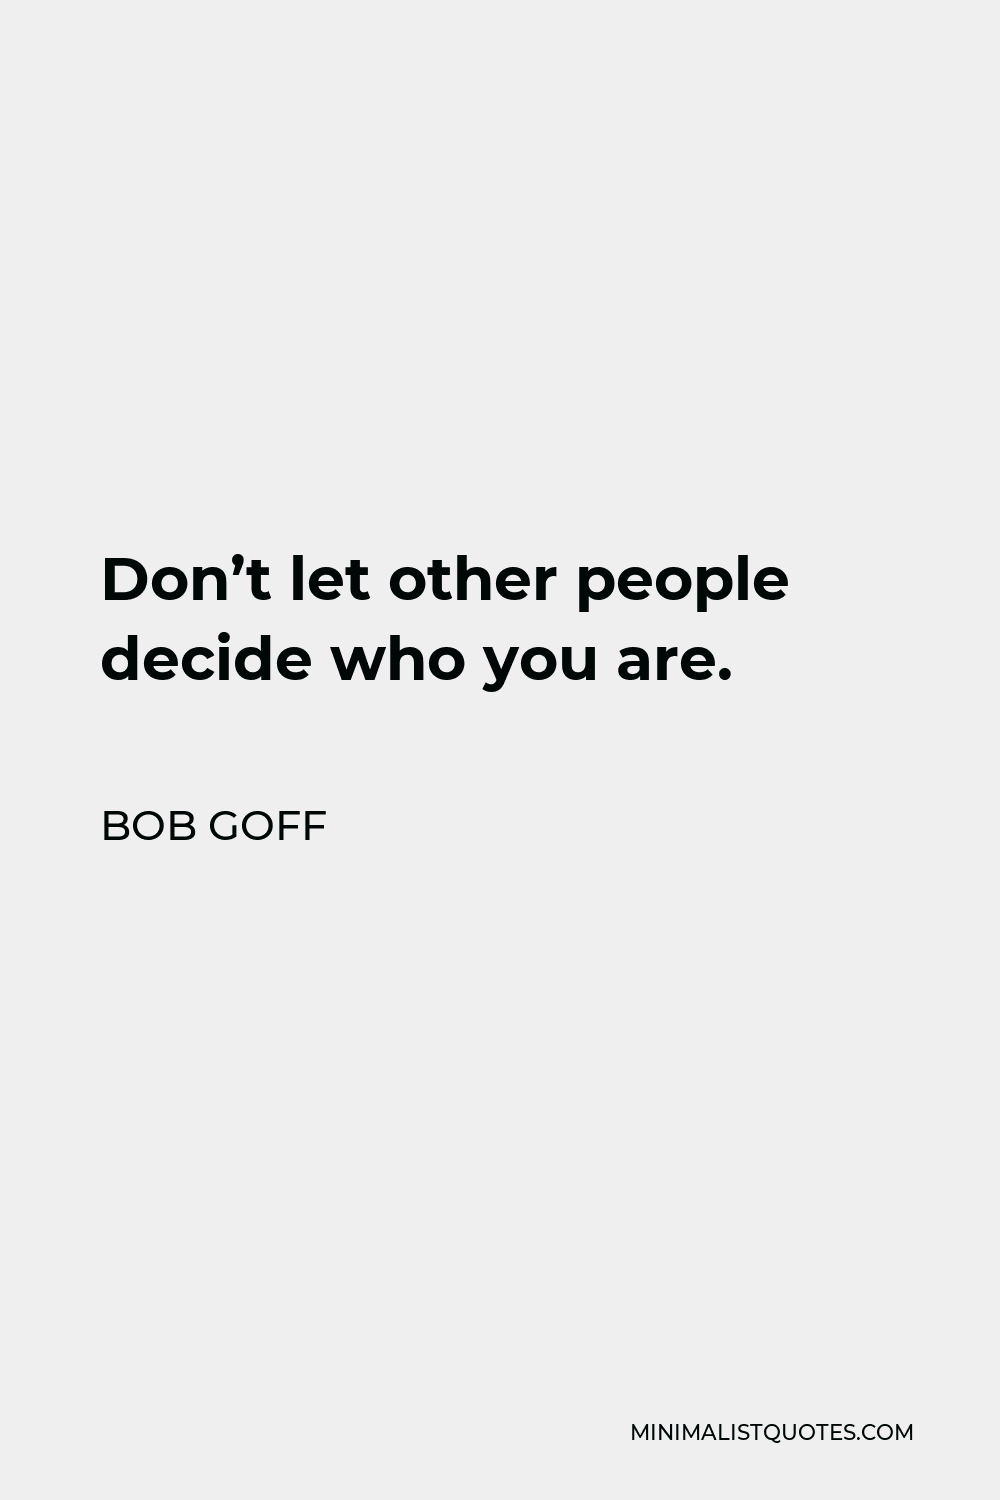 Bob Goff Quote - Don’t let other people decide who you are.